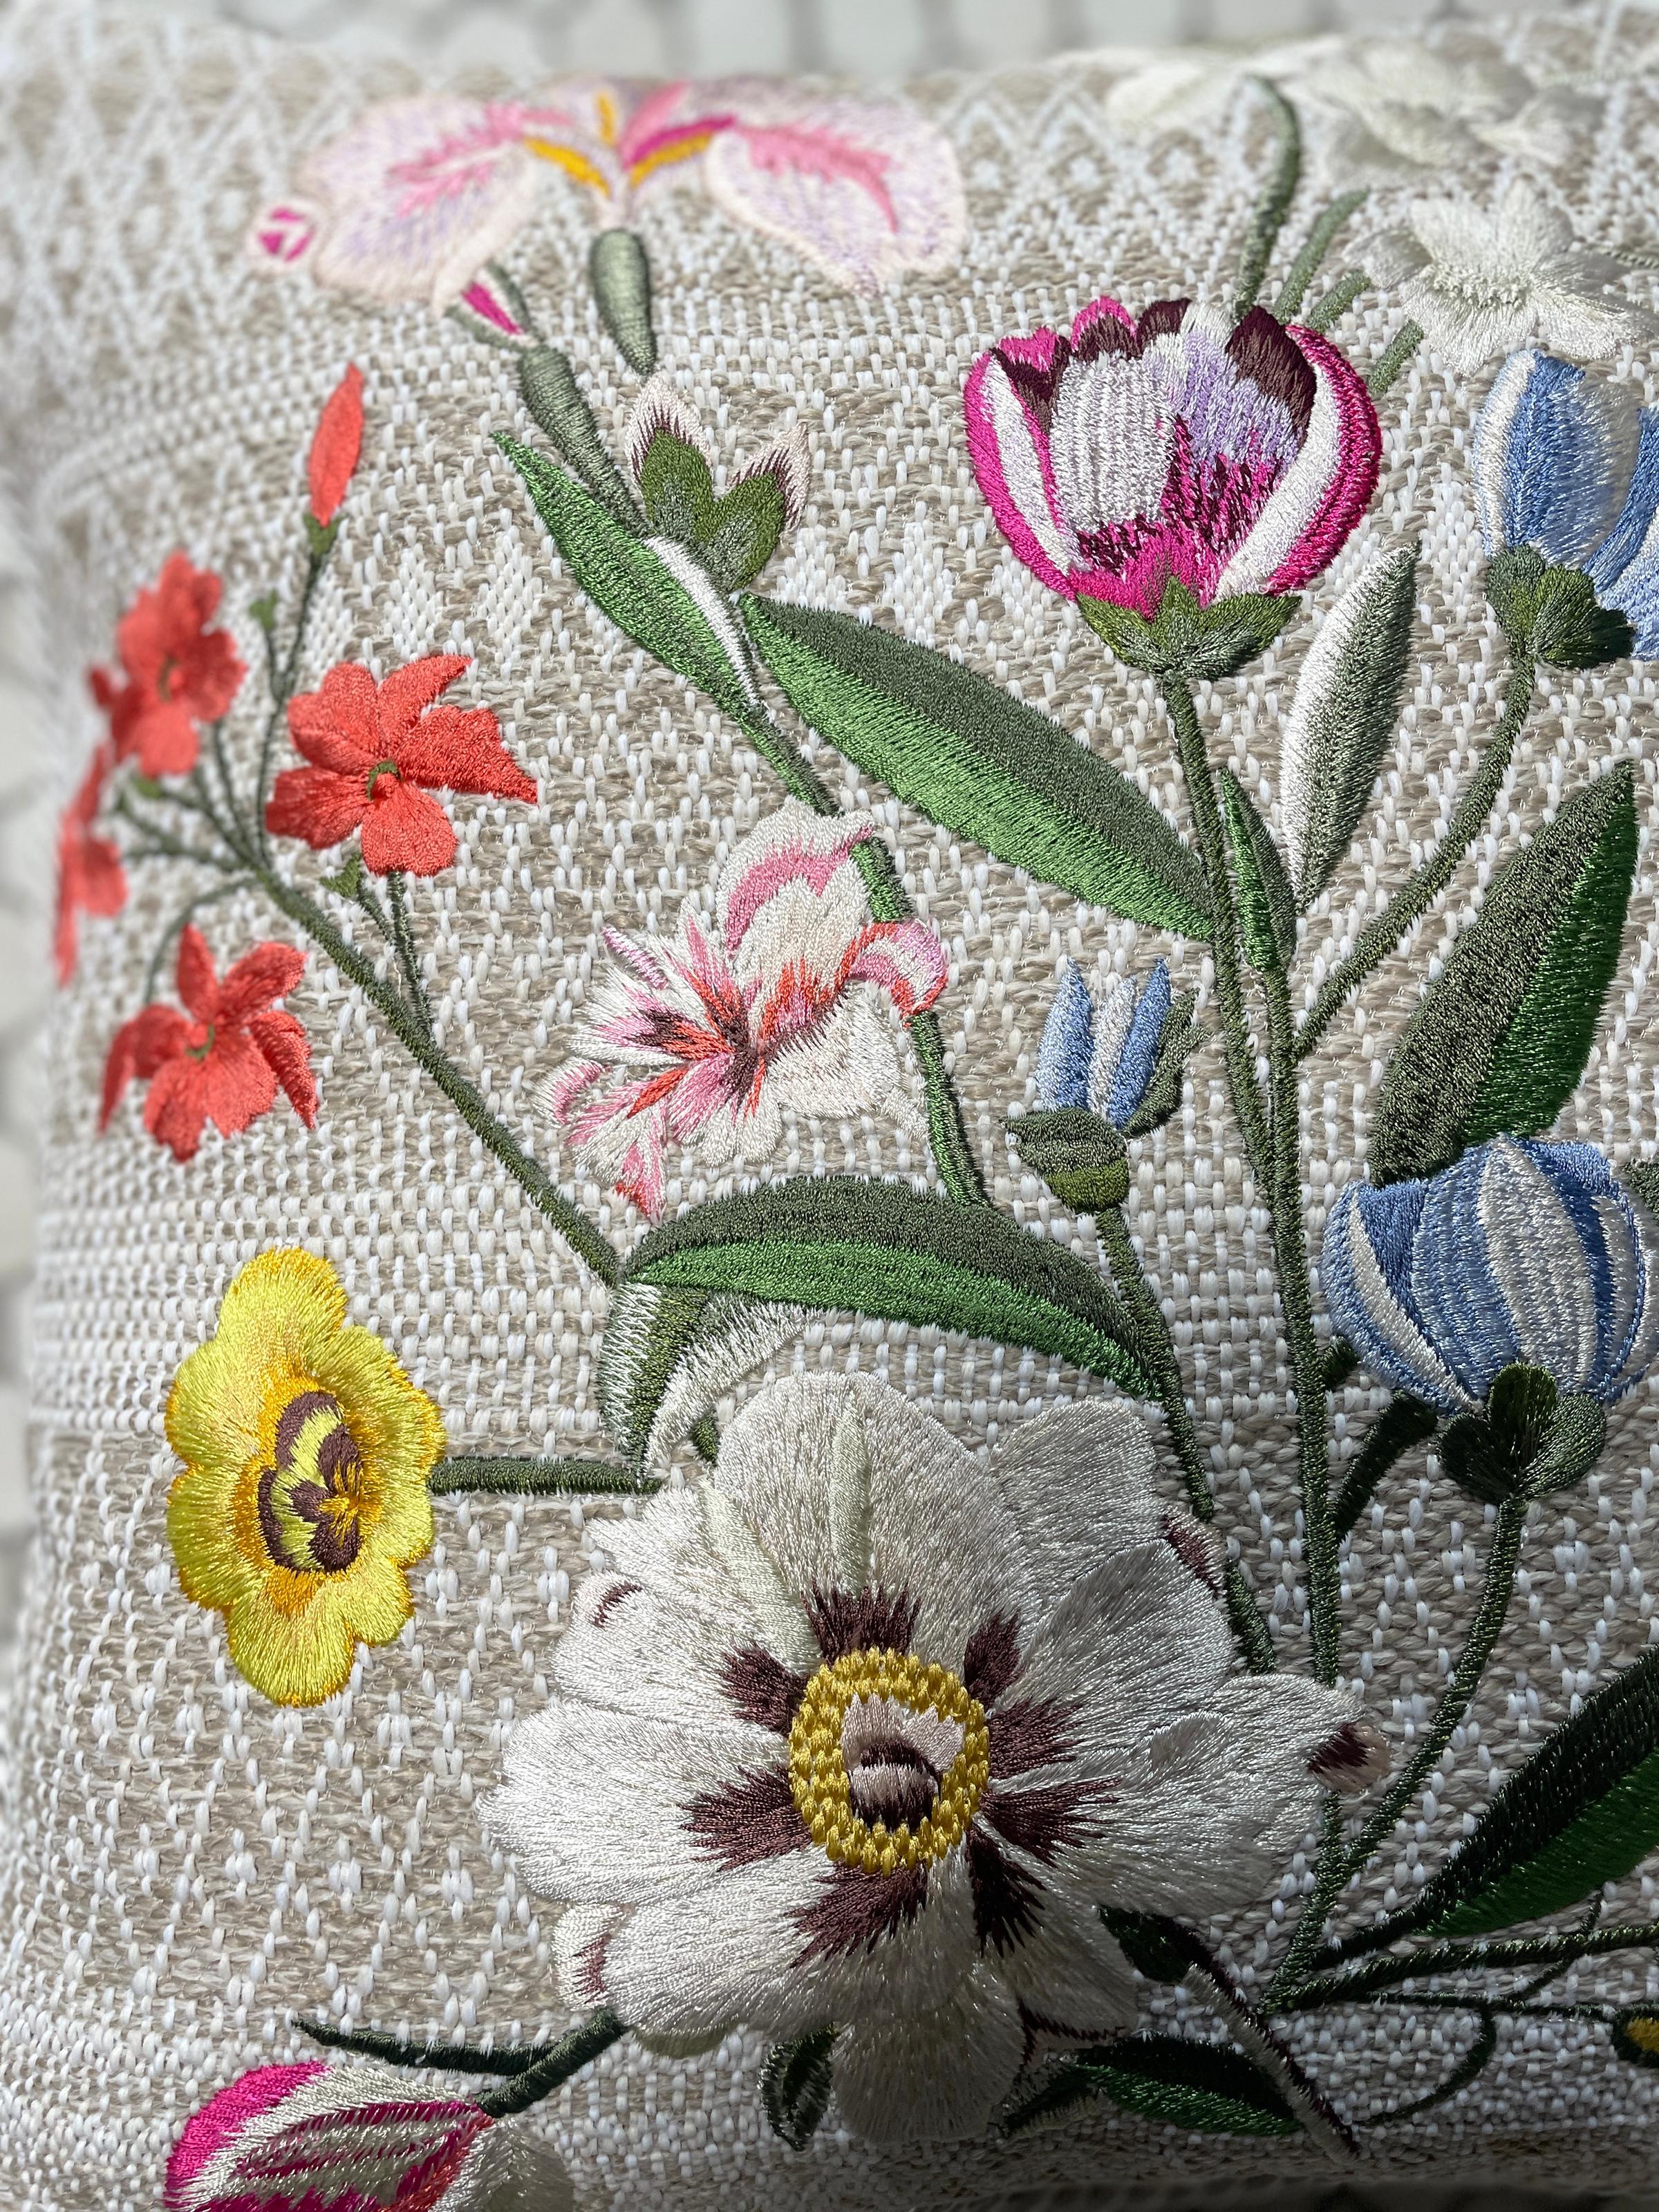 Vibrant hues of silk threads are hand embroidered into an elegant botanical bouquet. Fuchsia poppies , pastel blue lilies and irises bloom on the beige heavy cotton with geometric natural colored pattern. The back side of the cushion is in quilted